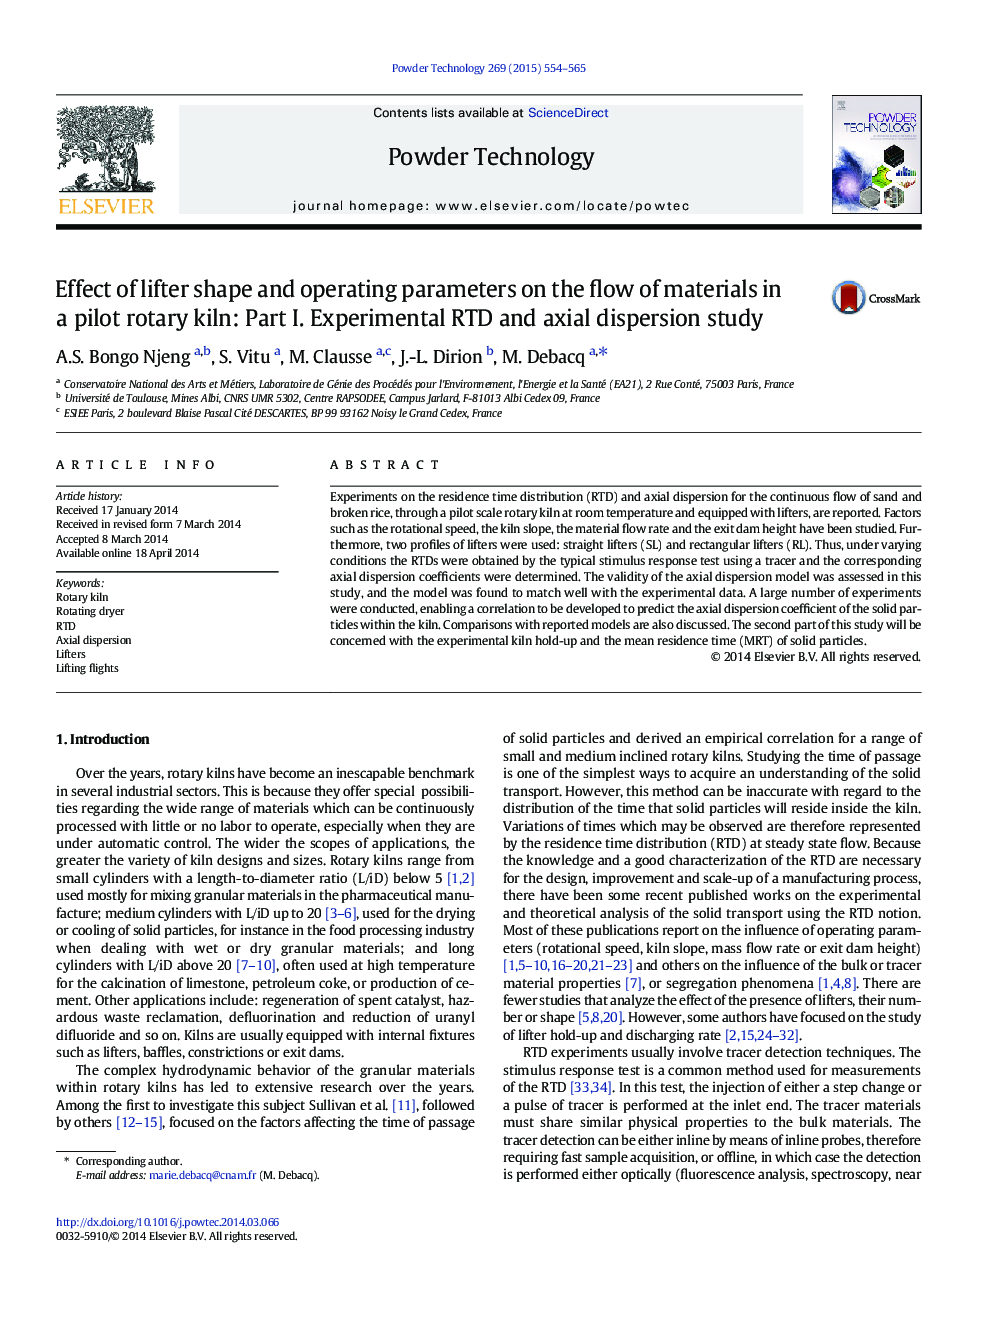 Effect of lifter shape and operating parameters on the flow of materials in a pilot rotary kiln: Part I. Experimental RTD and axial dispersion study